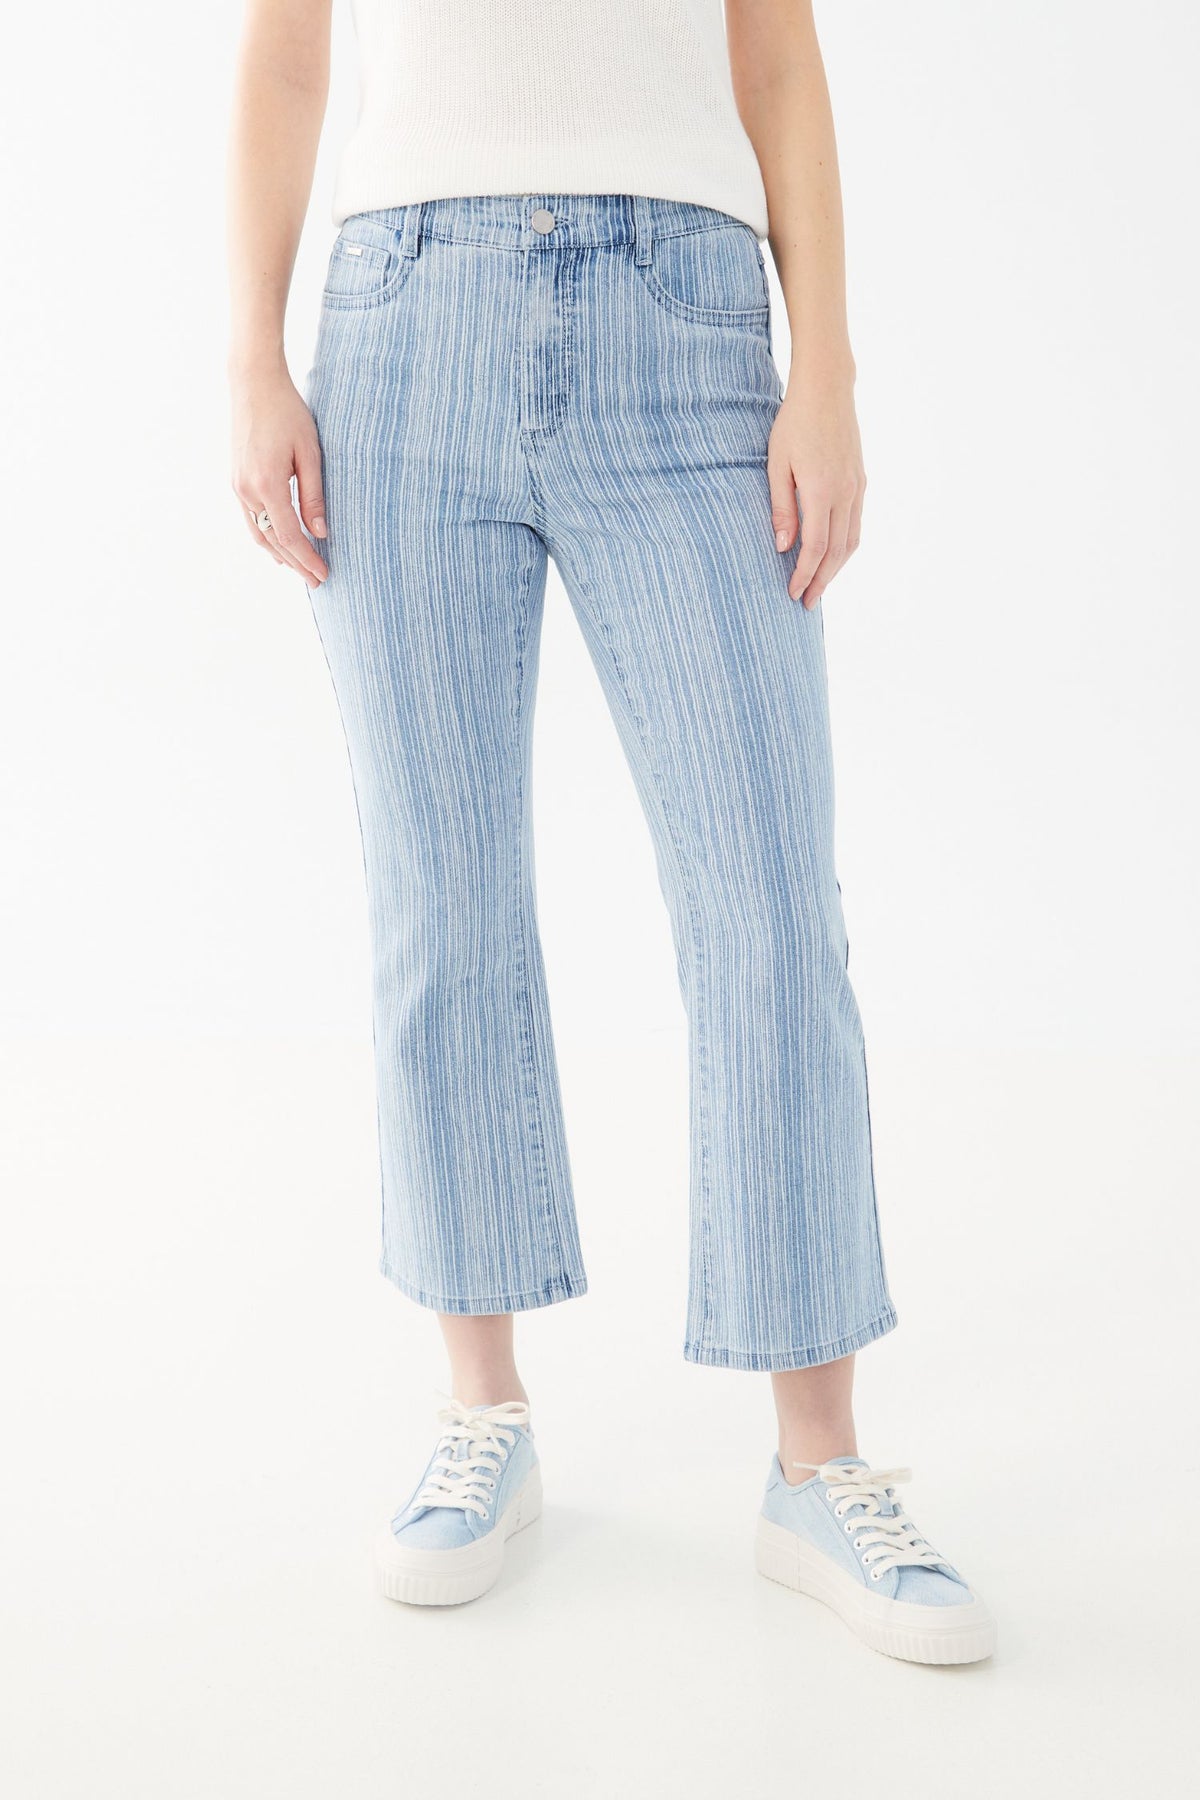 FDJ Suzanne Crop Jeans - Style 6860779, front